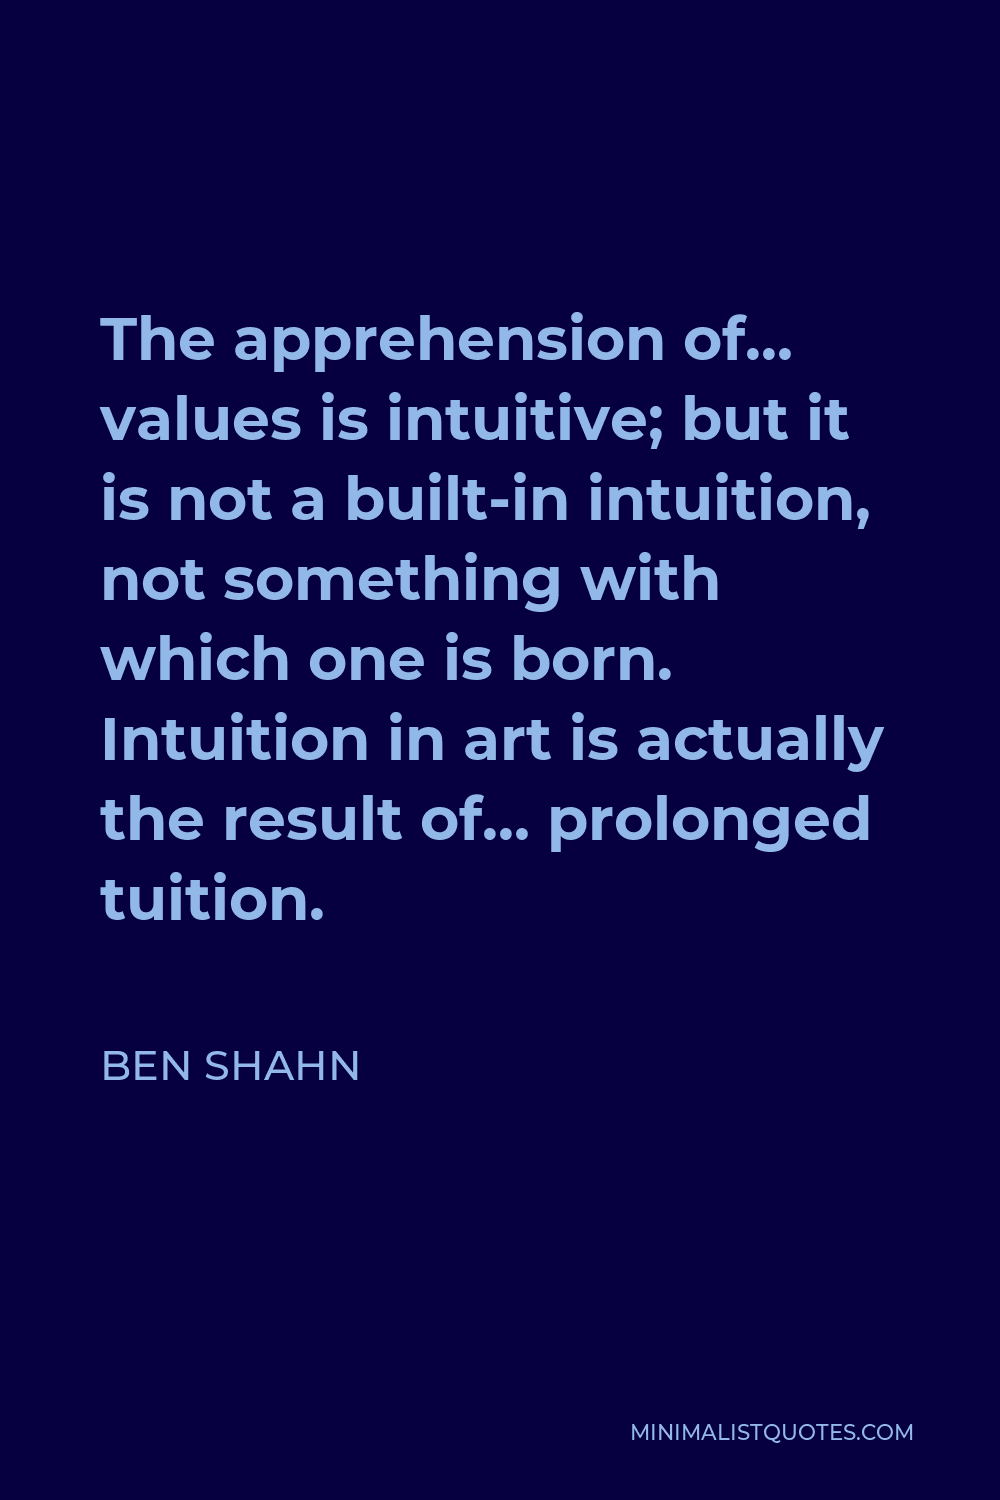 Ben Shahn Quote - The apprehension of… values is intuitive; but it is not a built-in intuition, not something with which one is born. Intuition in art is actually the result of… prolonged tuition.